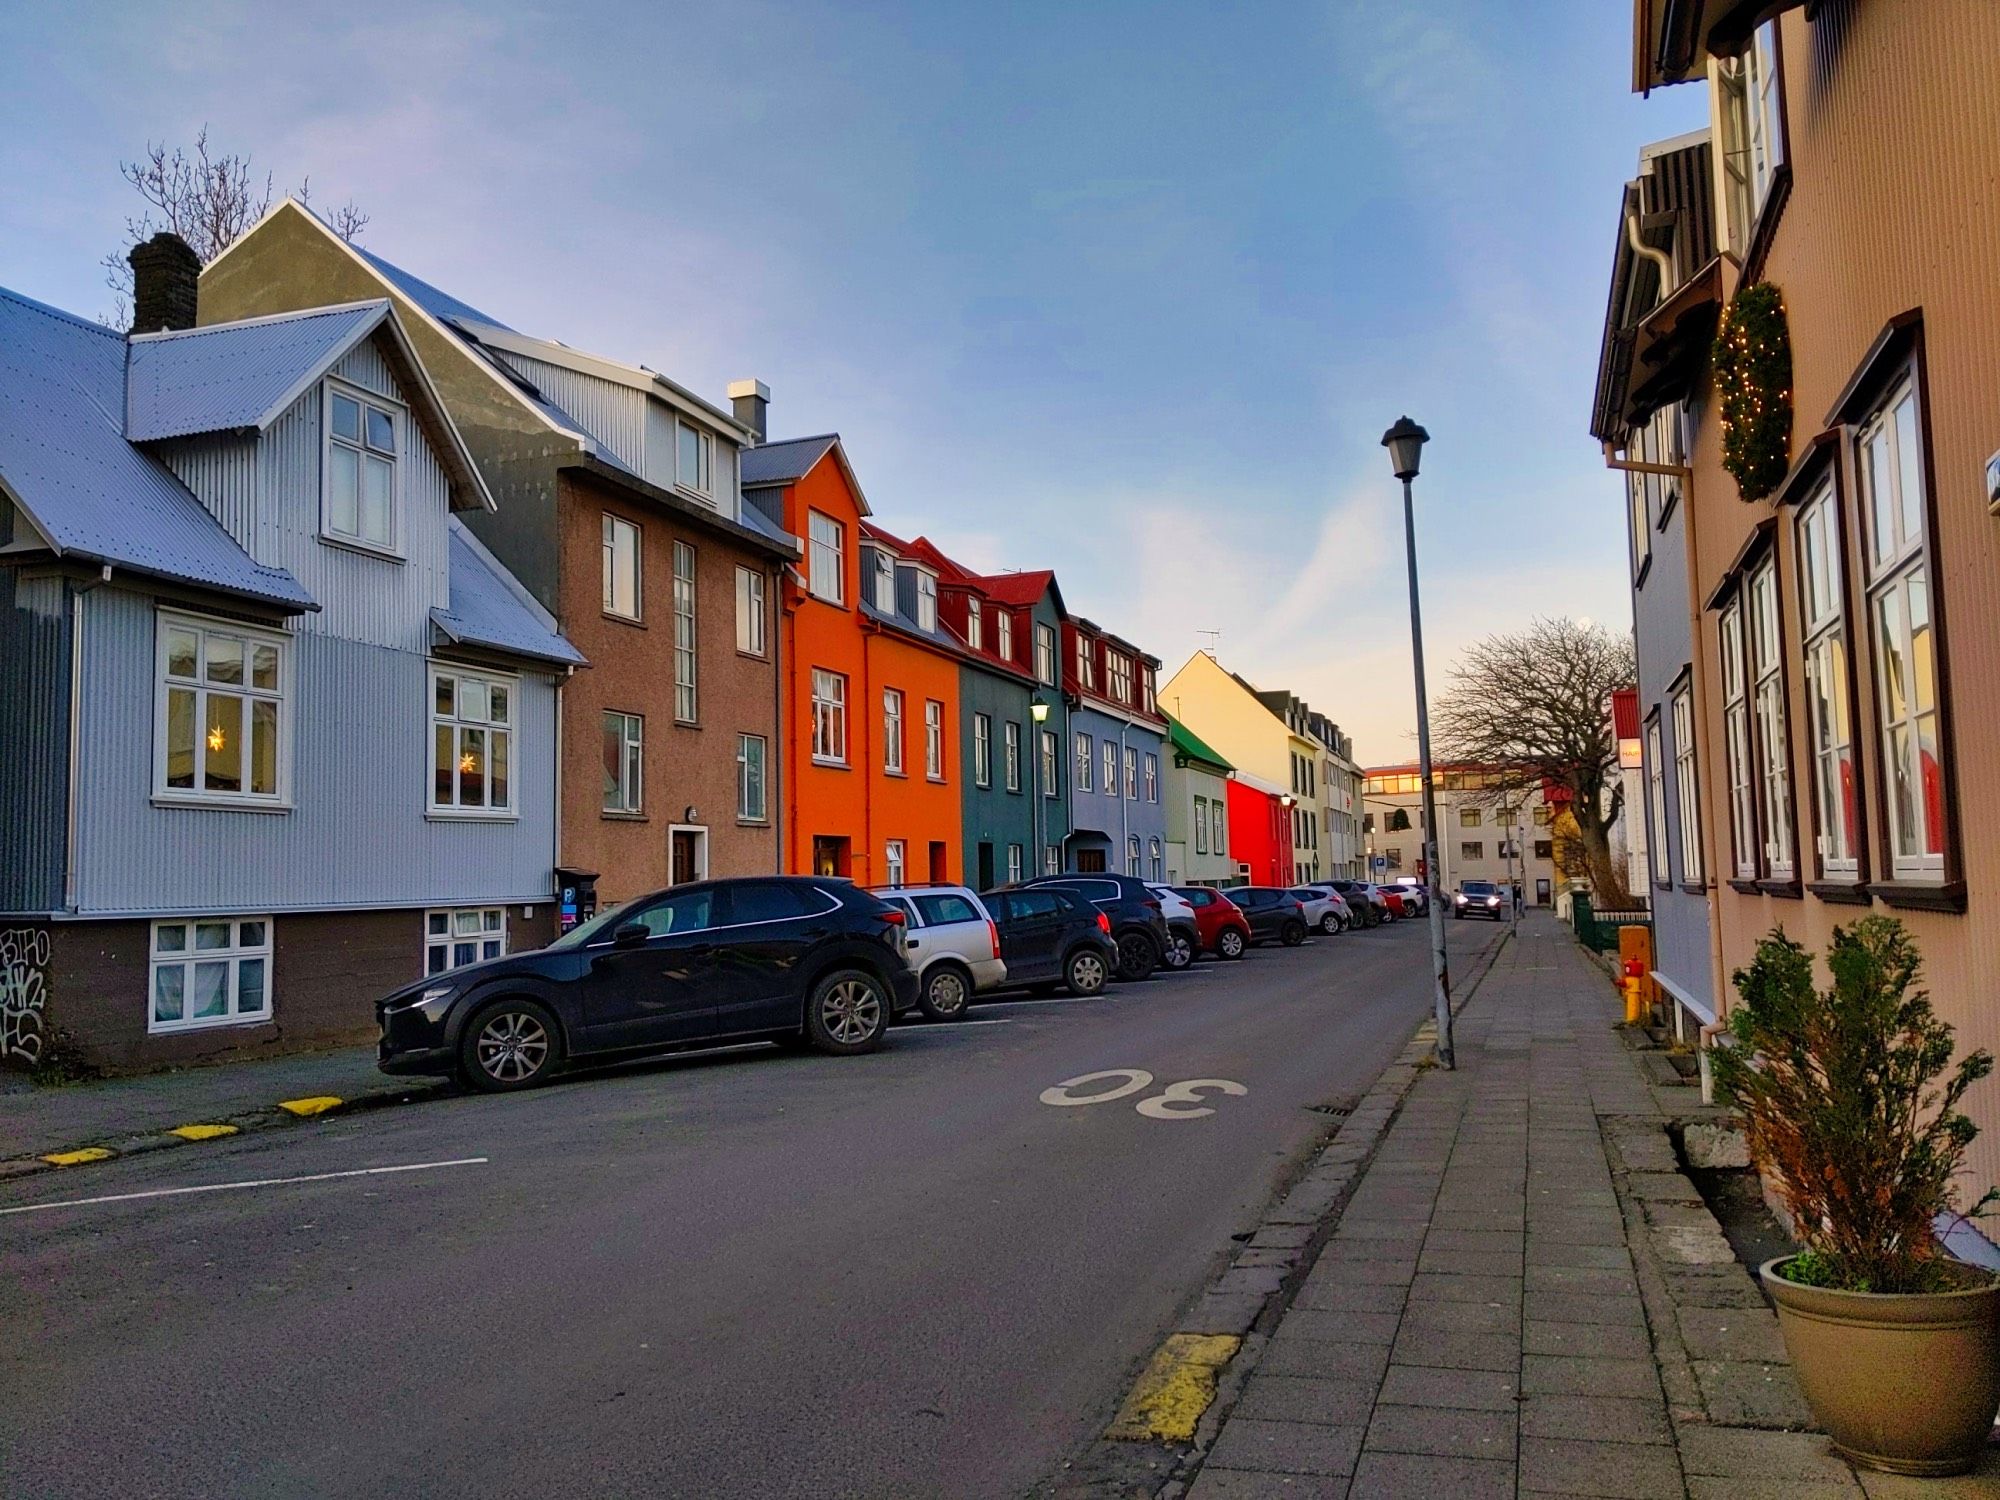 Colourful houses line a street in Reykjavik